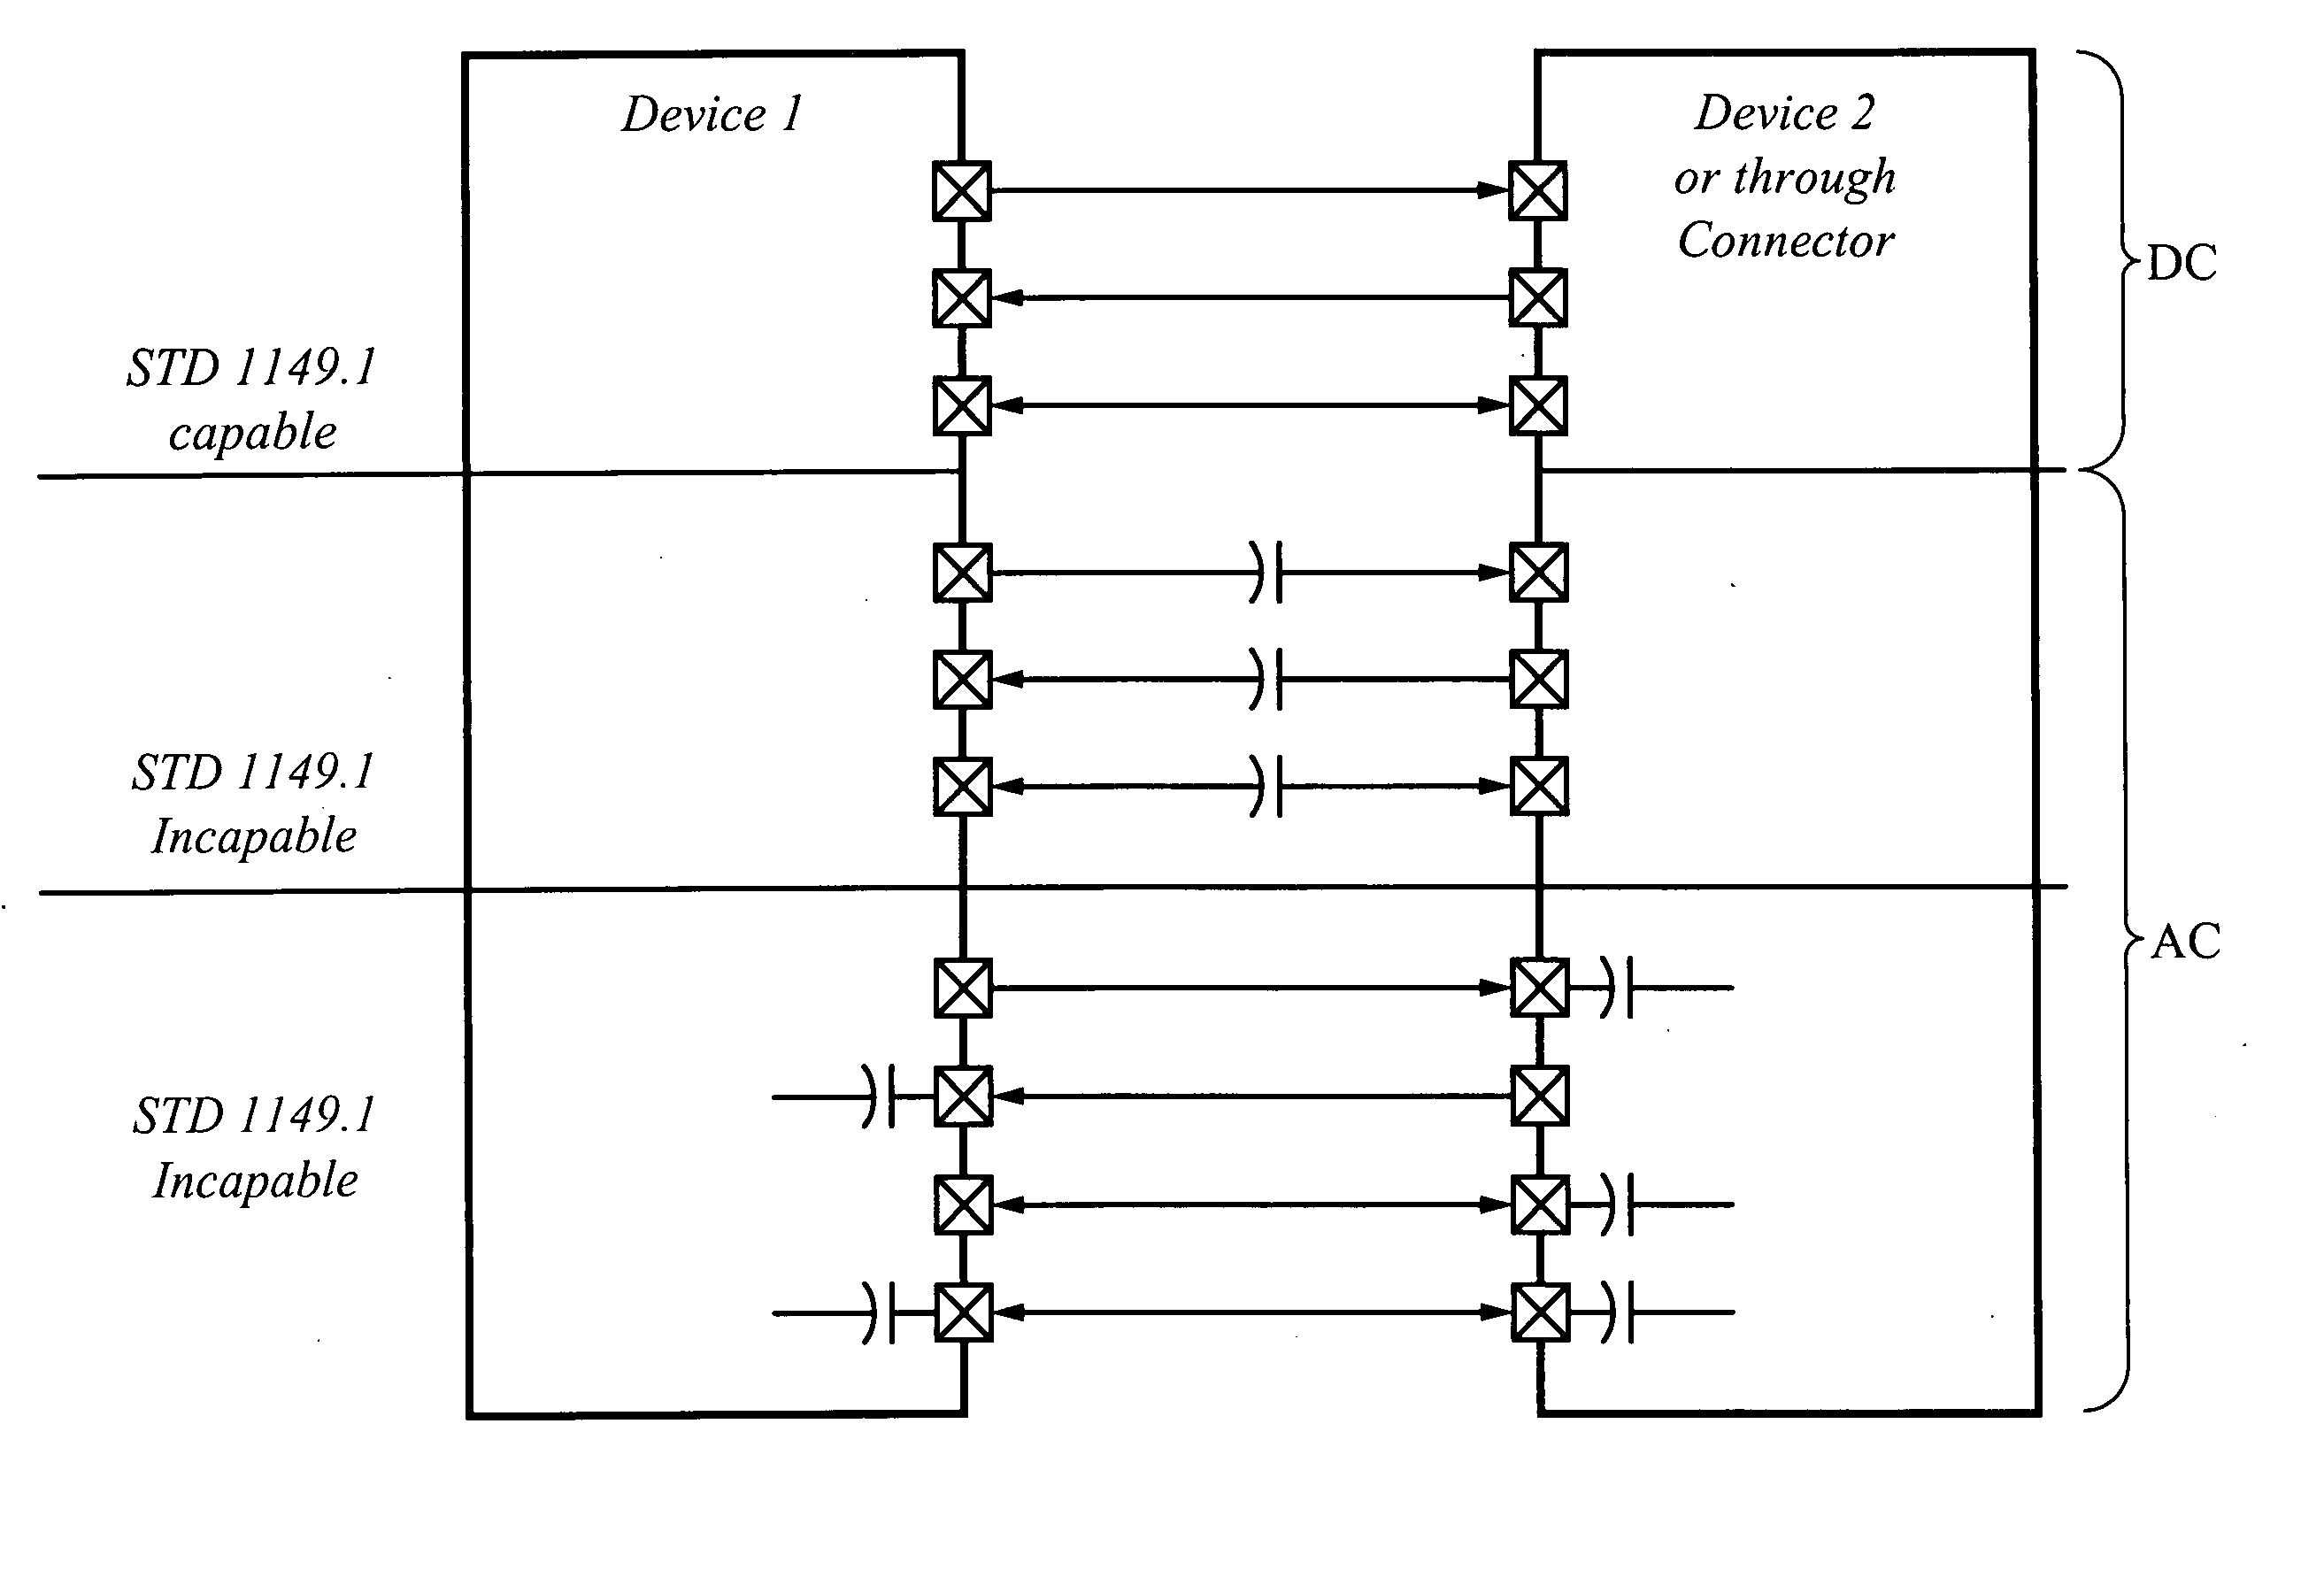 Test buffer design and interface mechanism for differential receiver AC/DC boundary scan test